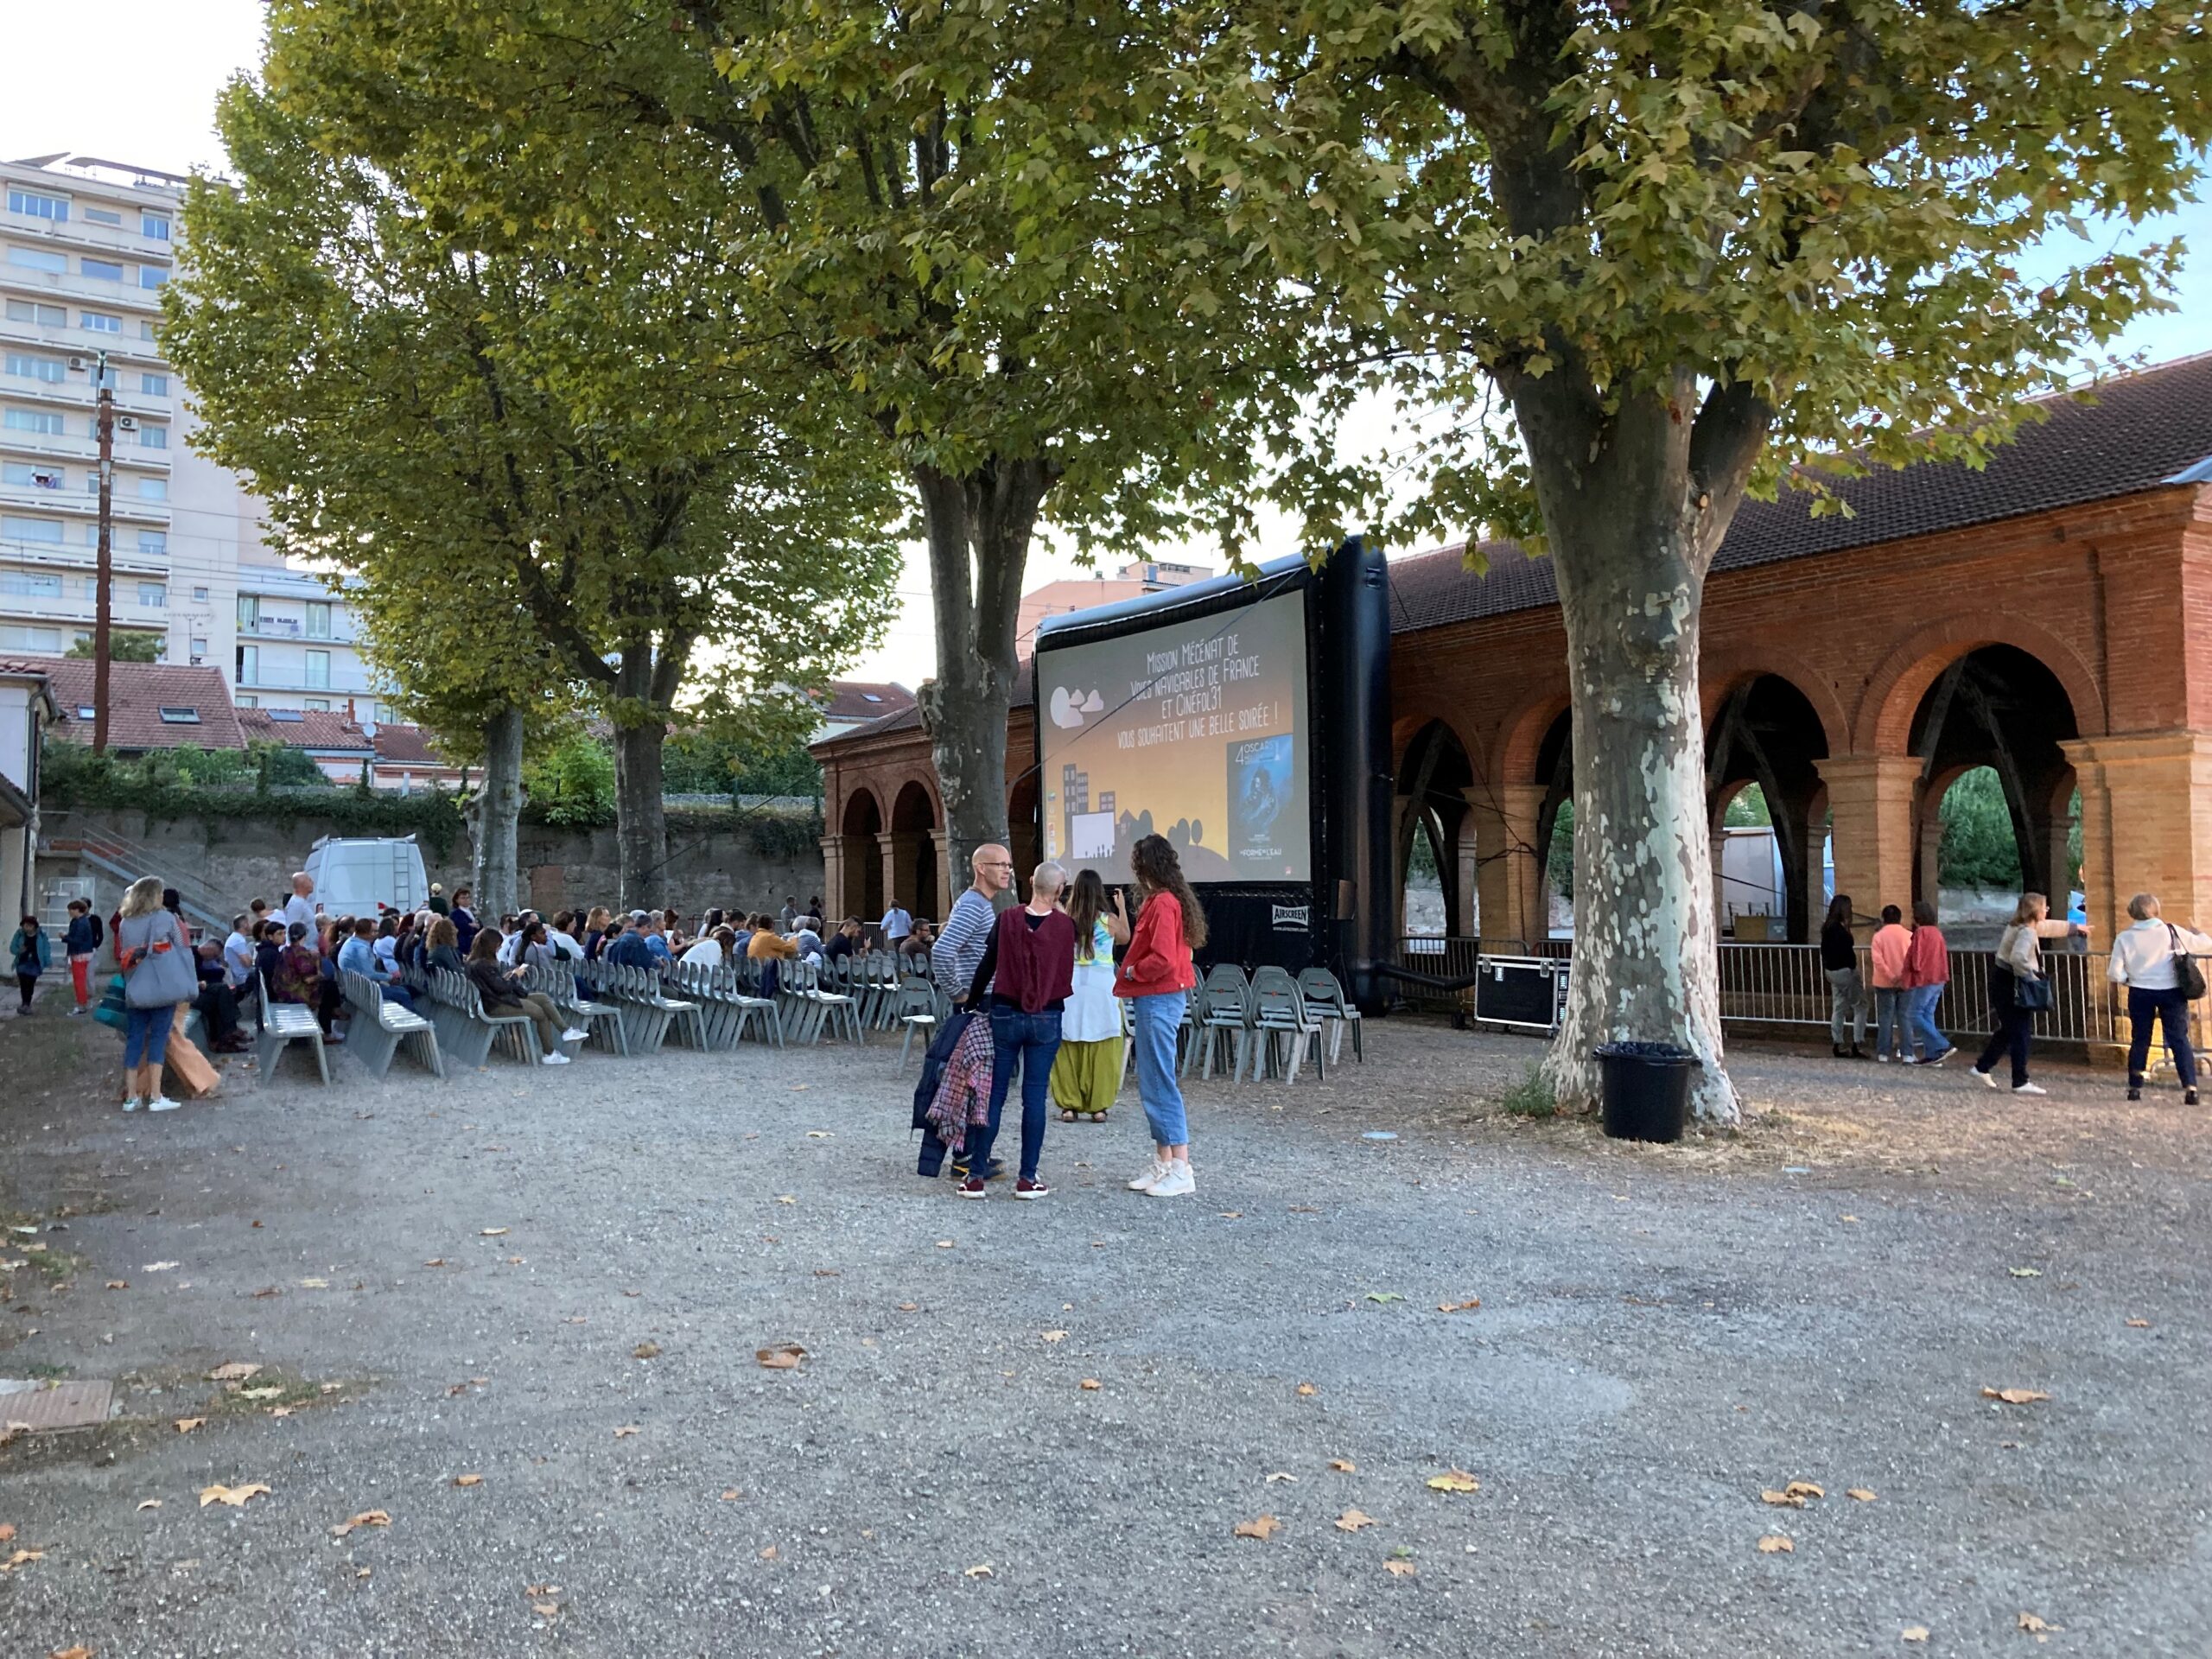 A moment of poetry at the Cale de Radoub to complete the open-air screening program